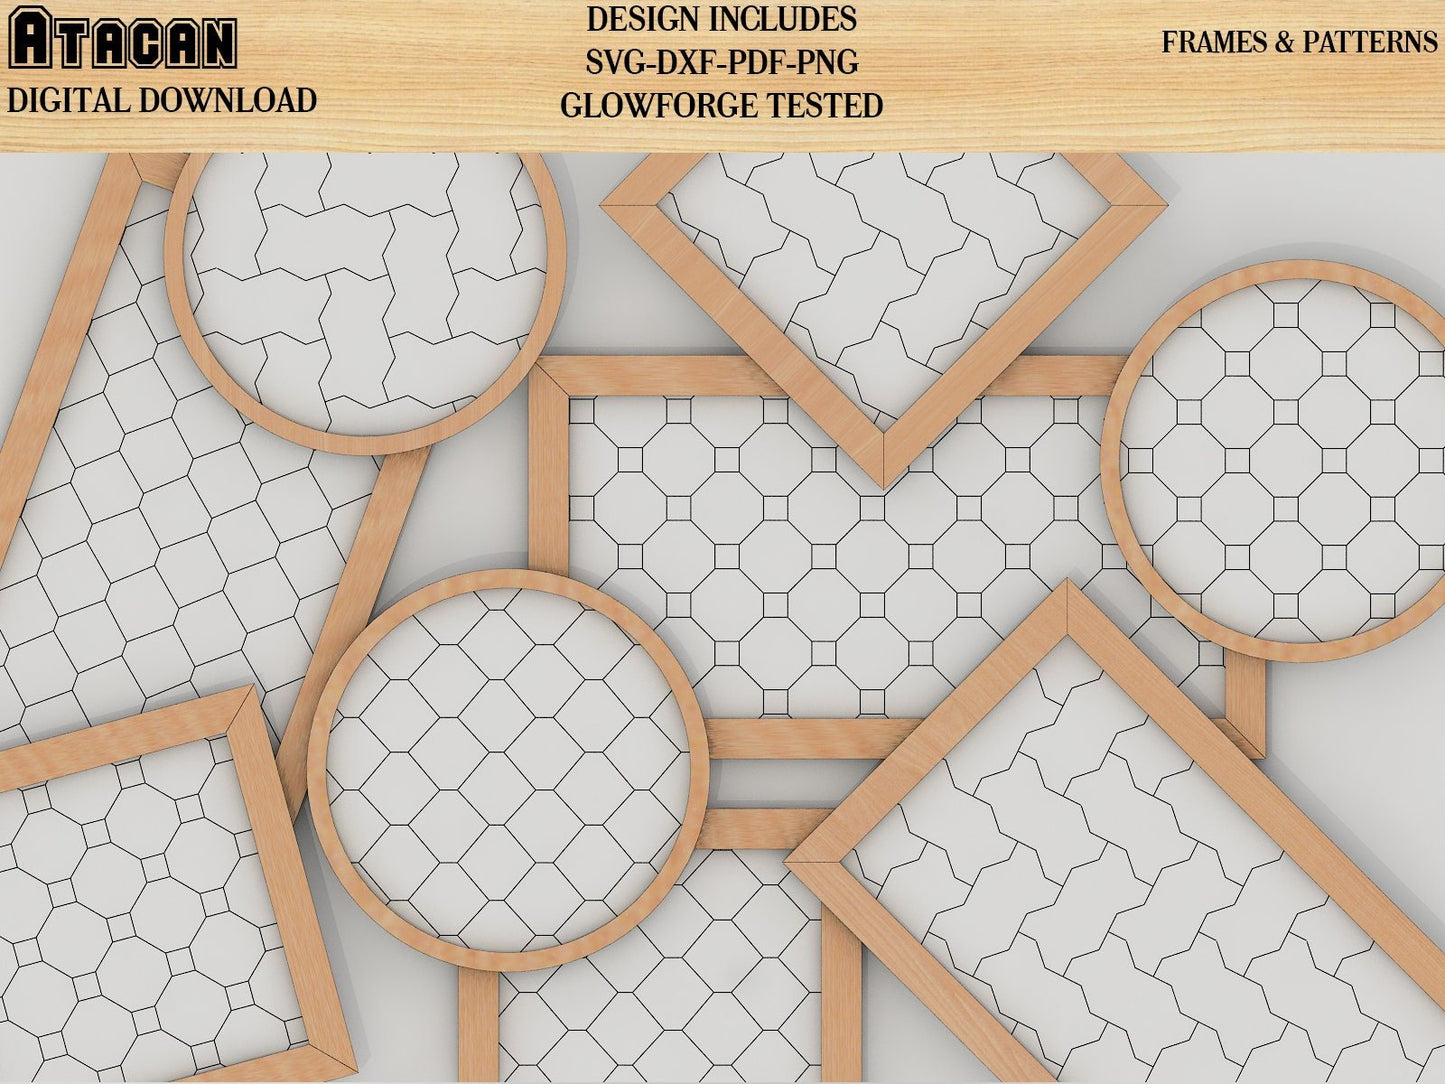 Patterns with Frame for Glowforge svg / Hexagon Square and Puzzle Pattern laser cut files 136